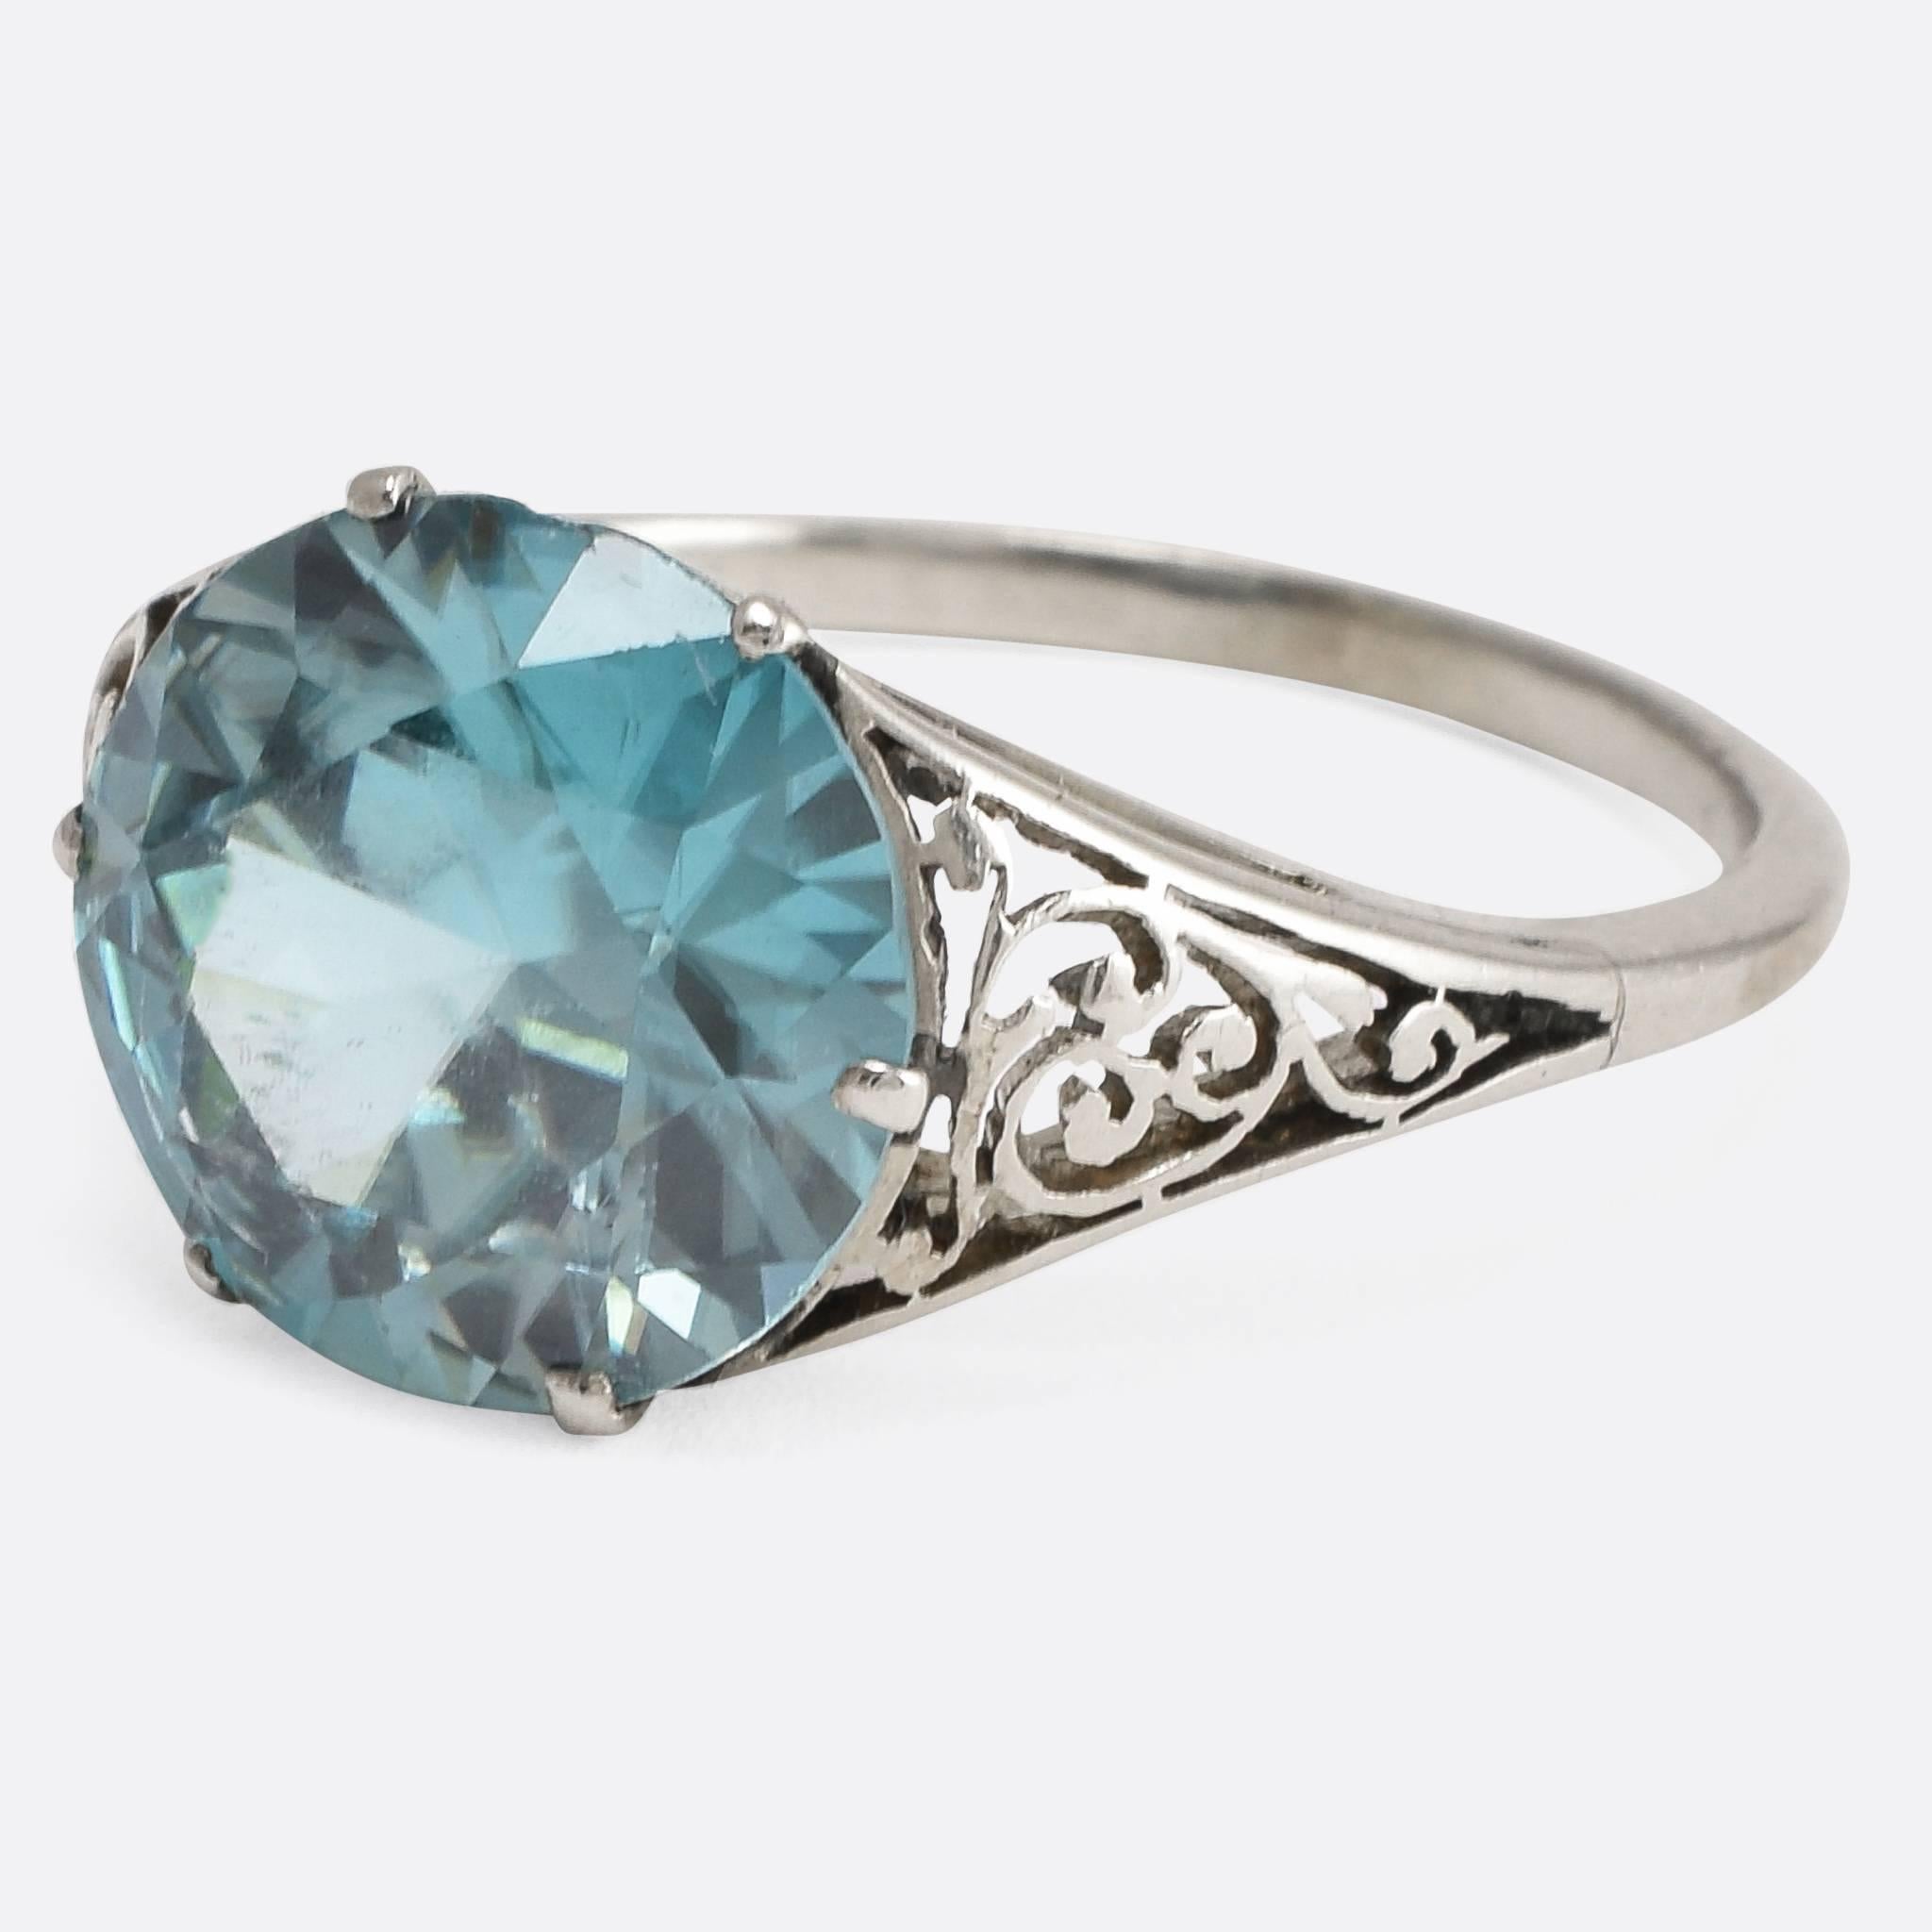 This 1930s solitaire ring is set with a vibrant 3.75 carat blue Zircon. The shoulders feature pretty filigree openwork and an elegant open gallery allows light behind the stone. The name zircon name derives from the Persian zargun, meaning 